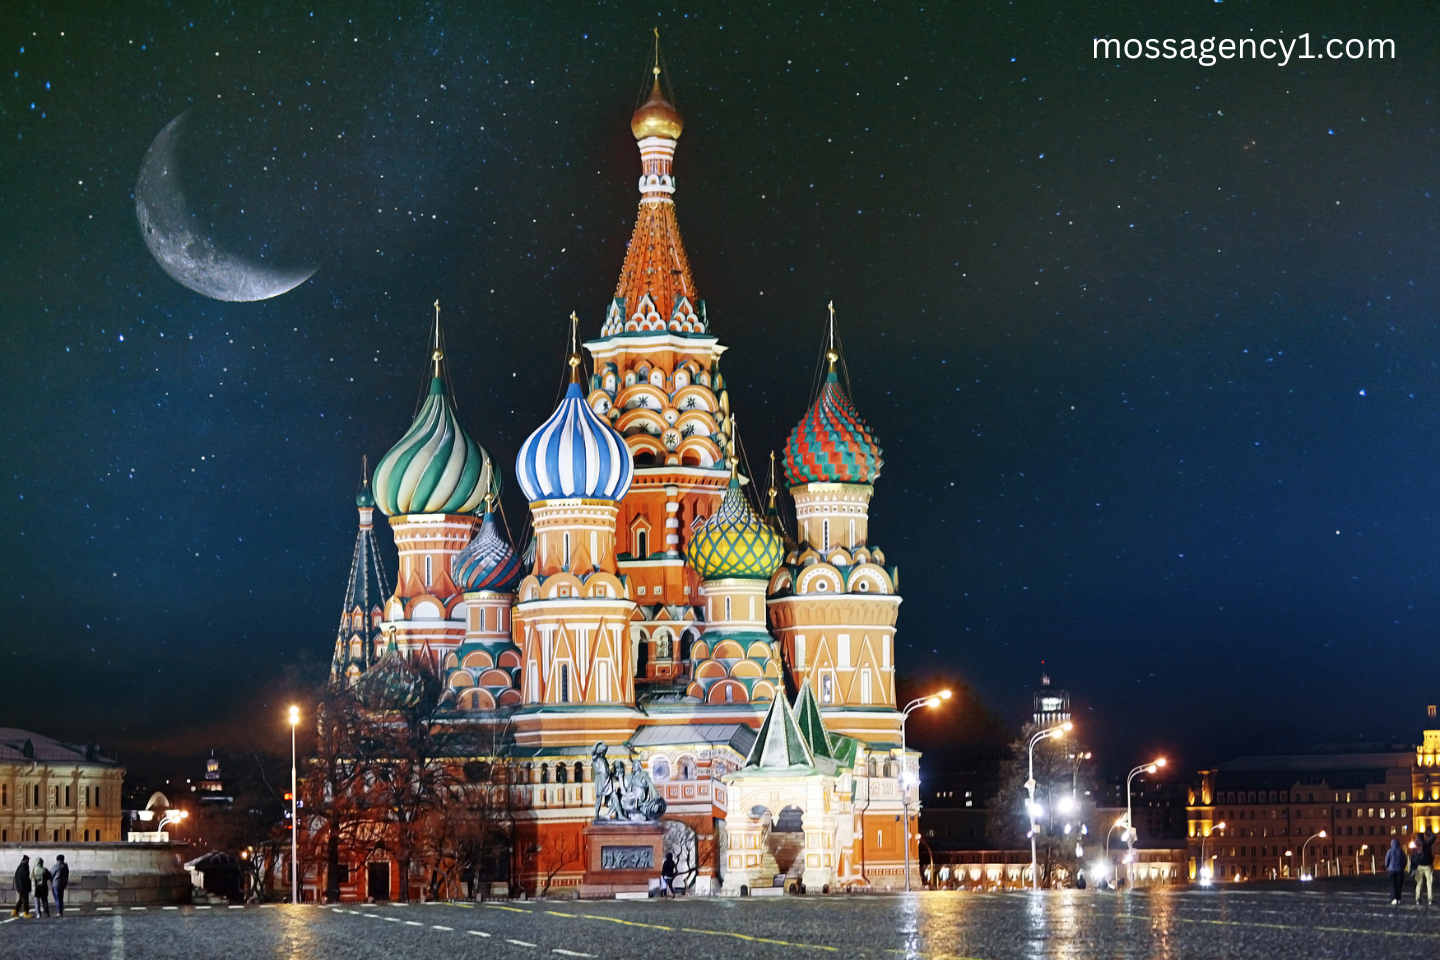 Moscow Kremlin: Journey Through Time and History